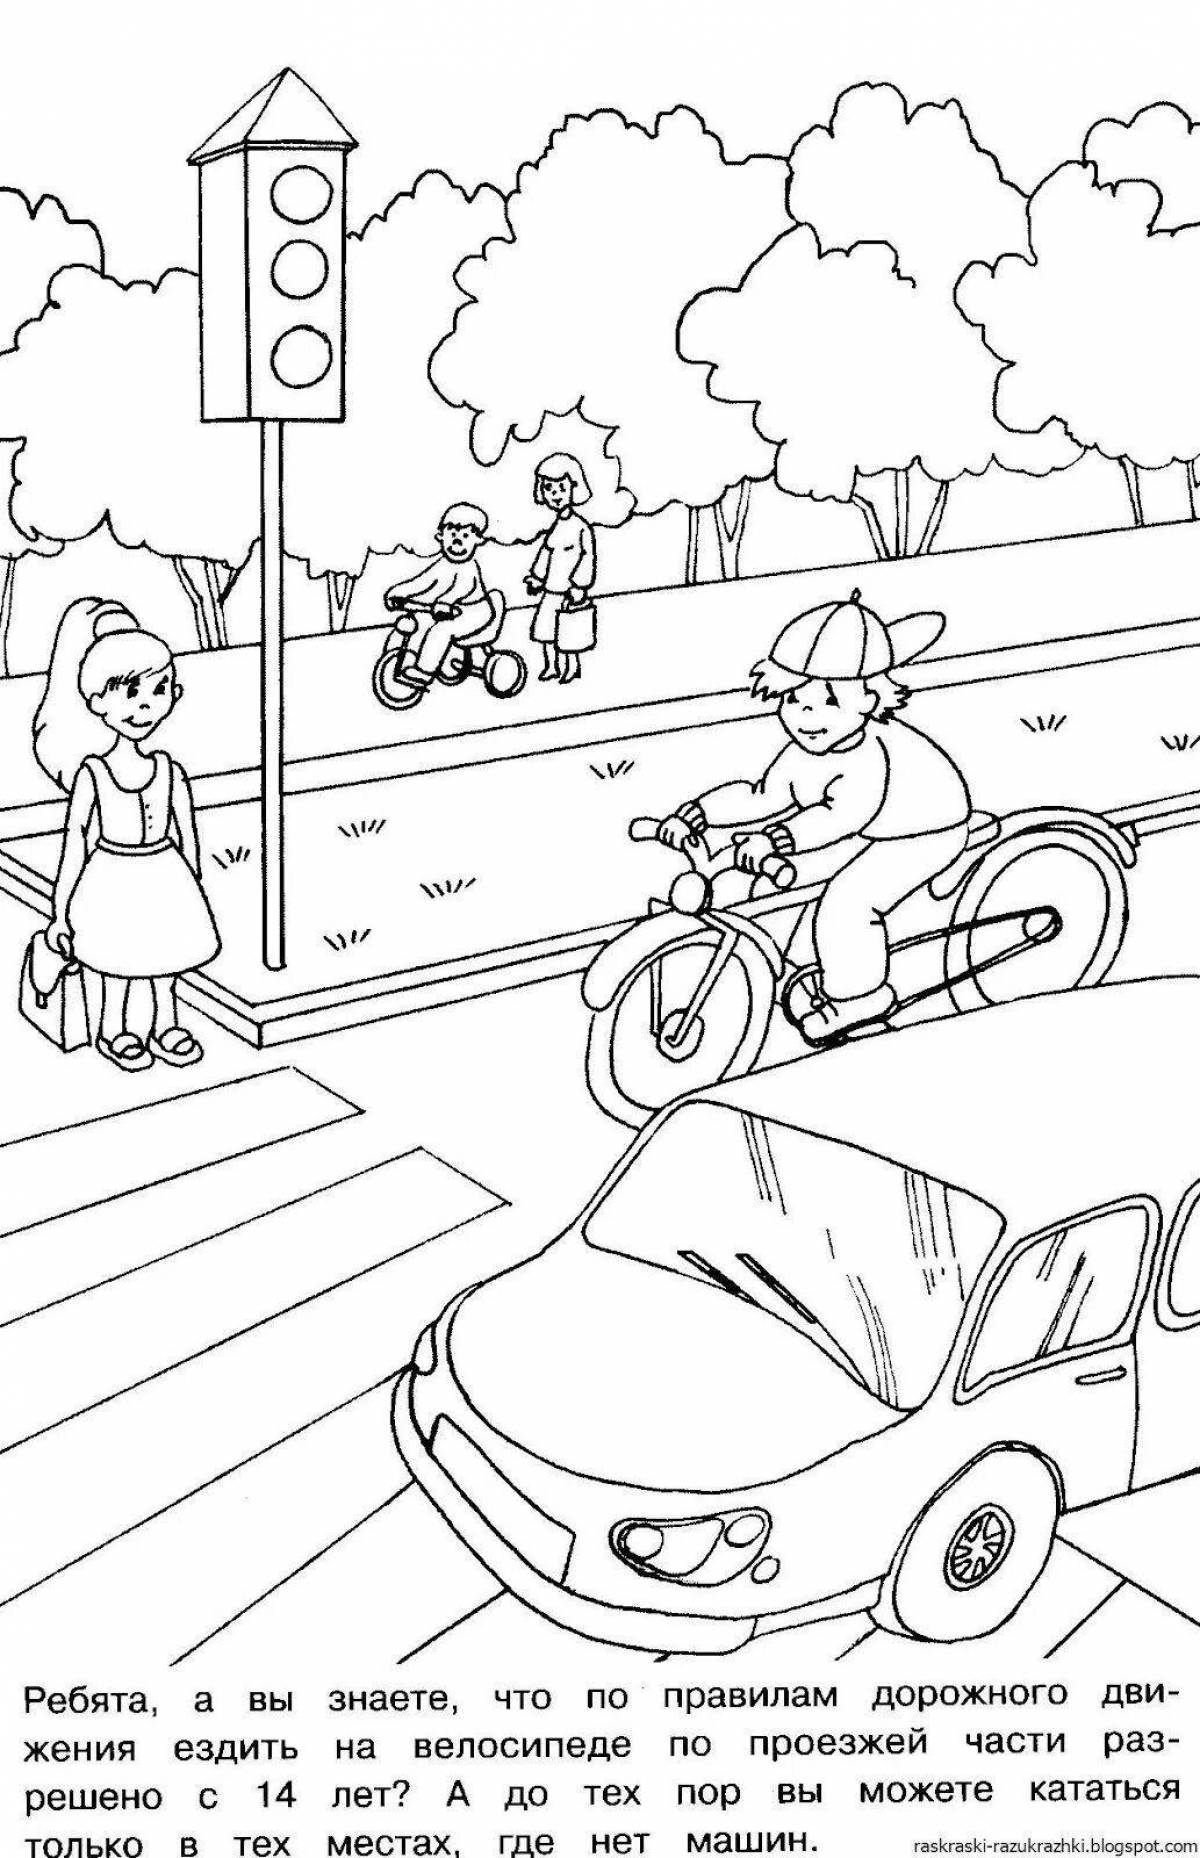 1st grade traffic rules playful coloring page